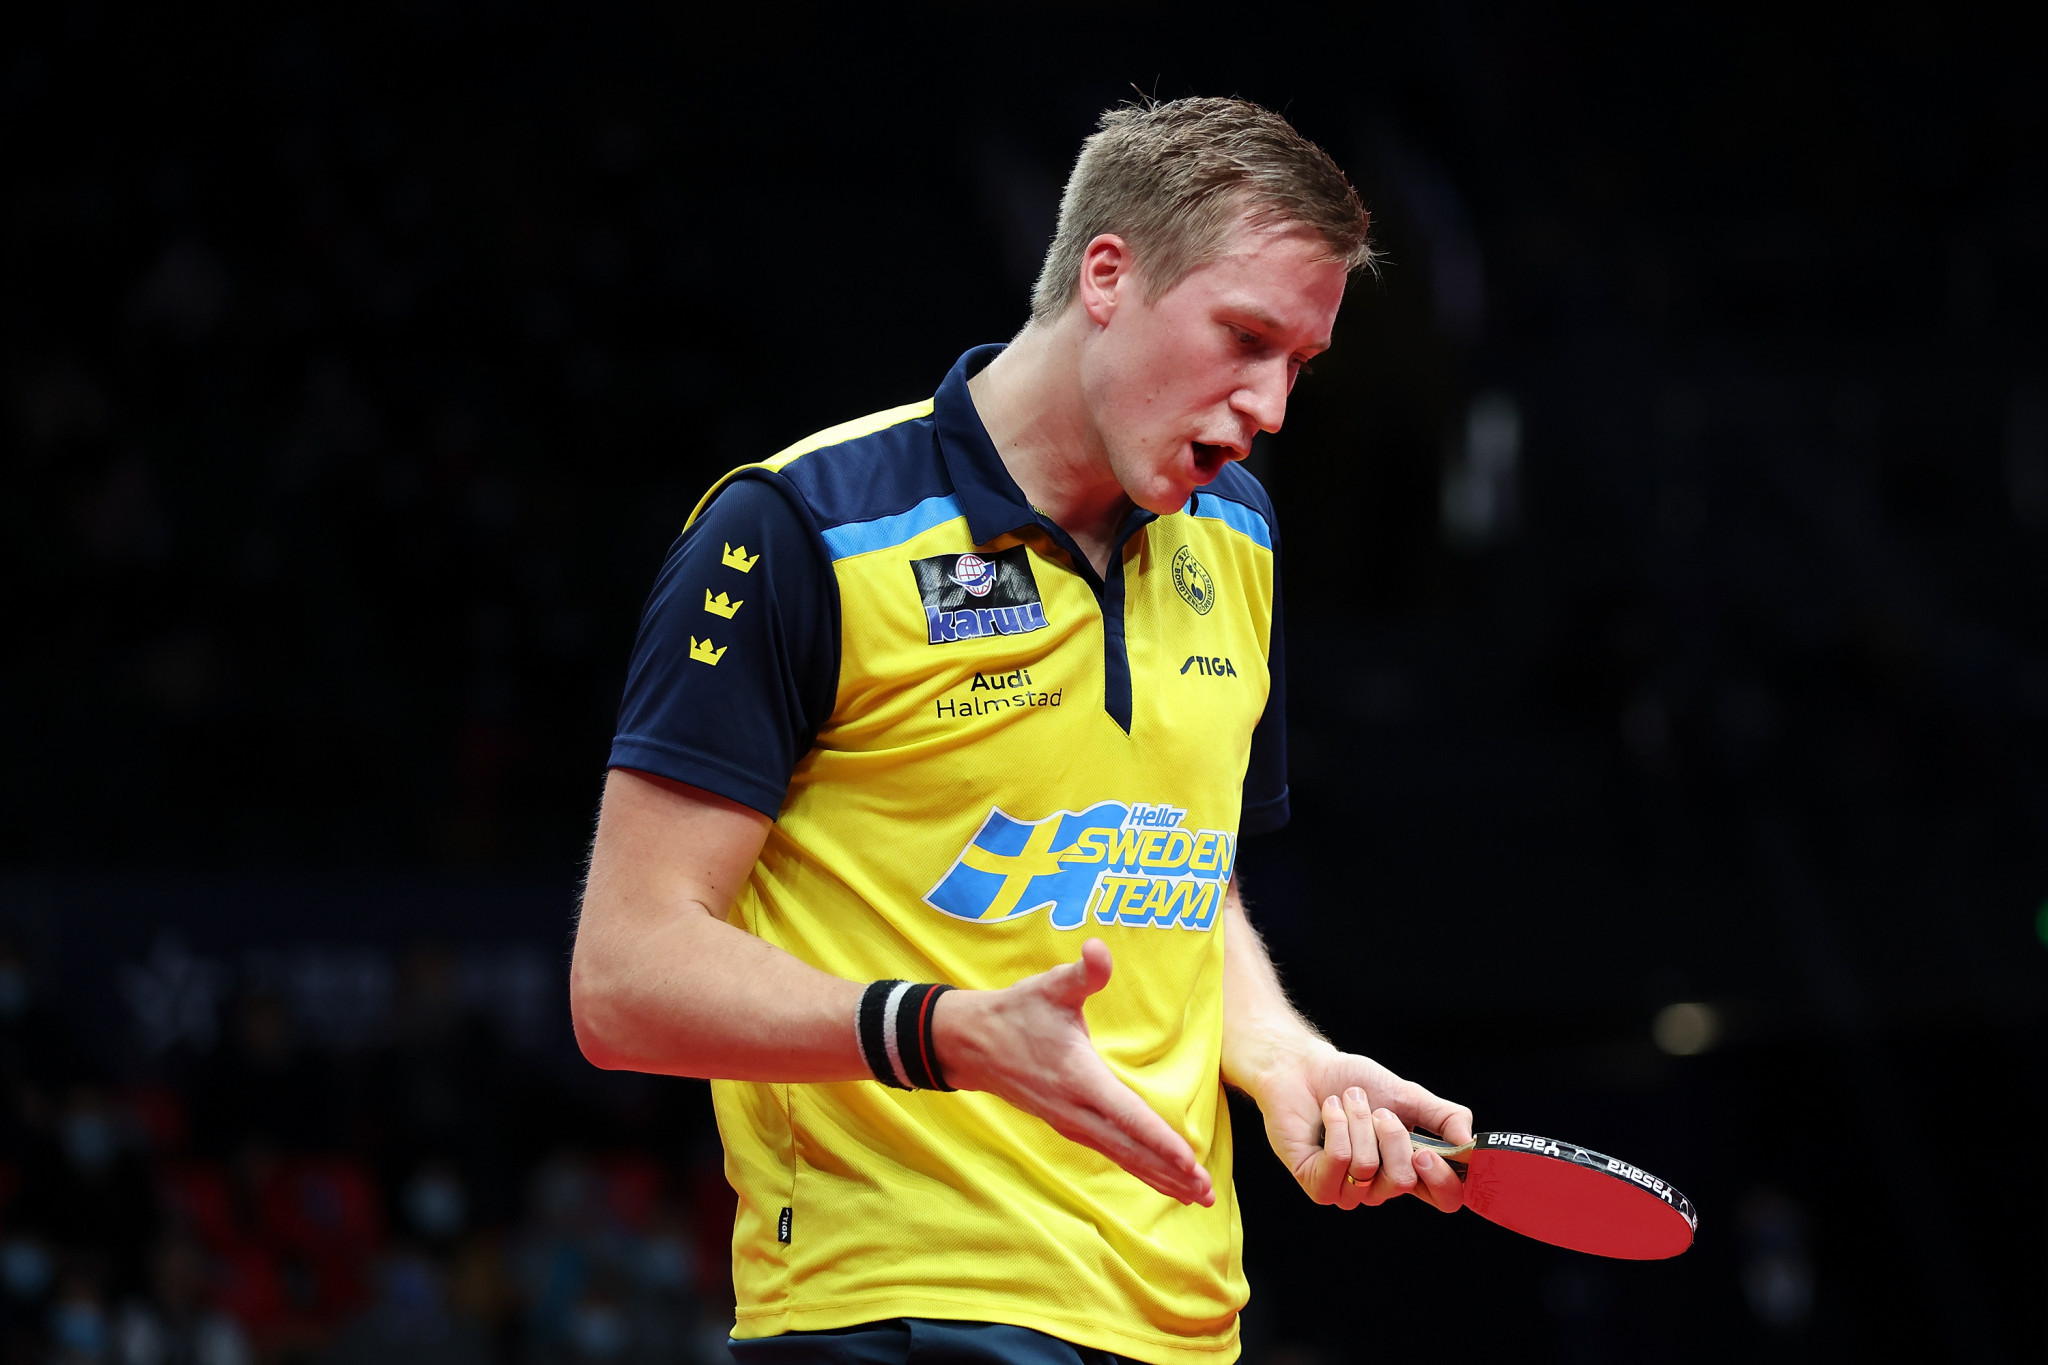 World number eight Matthias Falck of Sweden suffered a surprise straight game loss on day two of the WTT Star Contender tournament in Qatar ©Getty Images